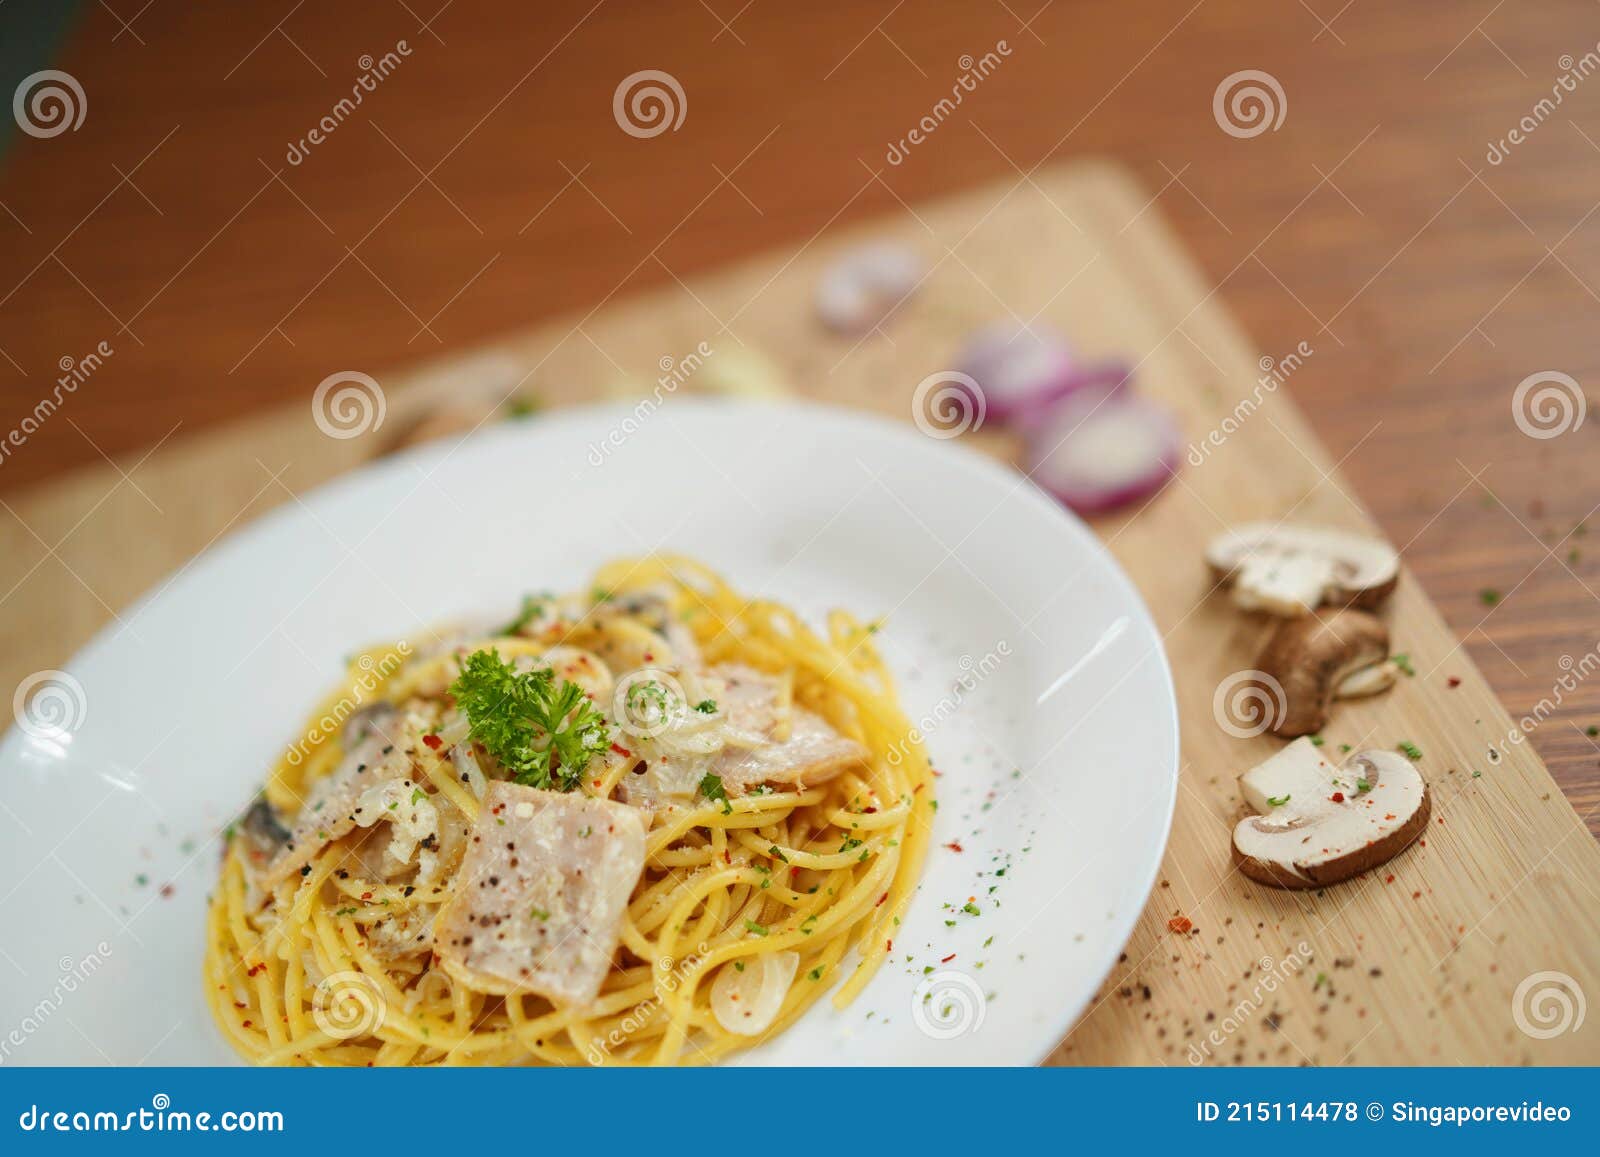 Tilted Top View of Spaghetti Carbonara Lunch Dinner Meal Stock Photo ...